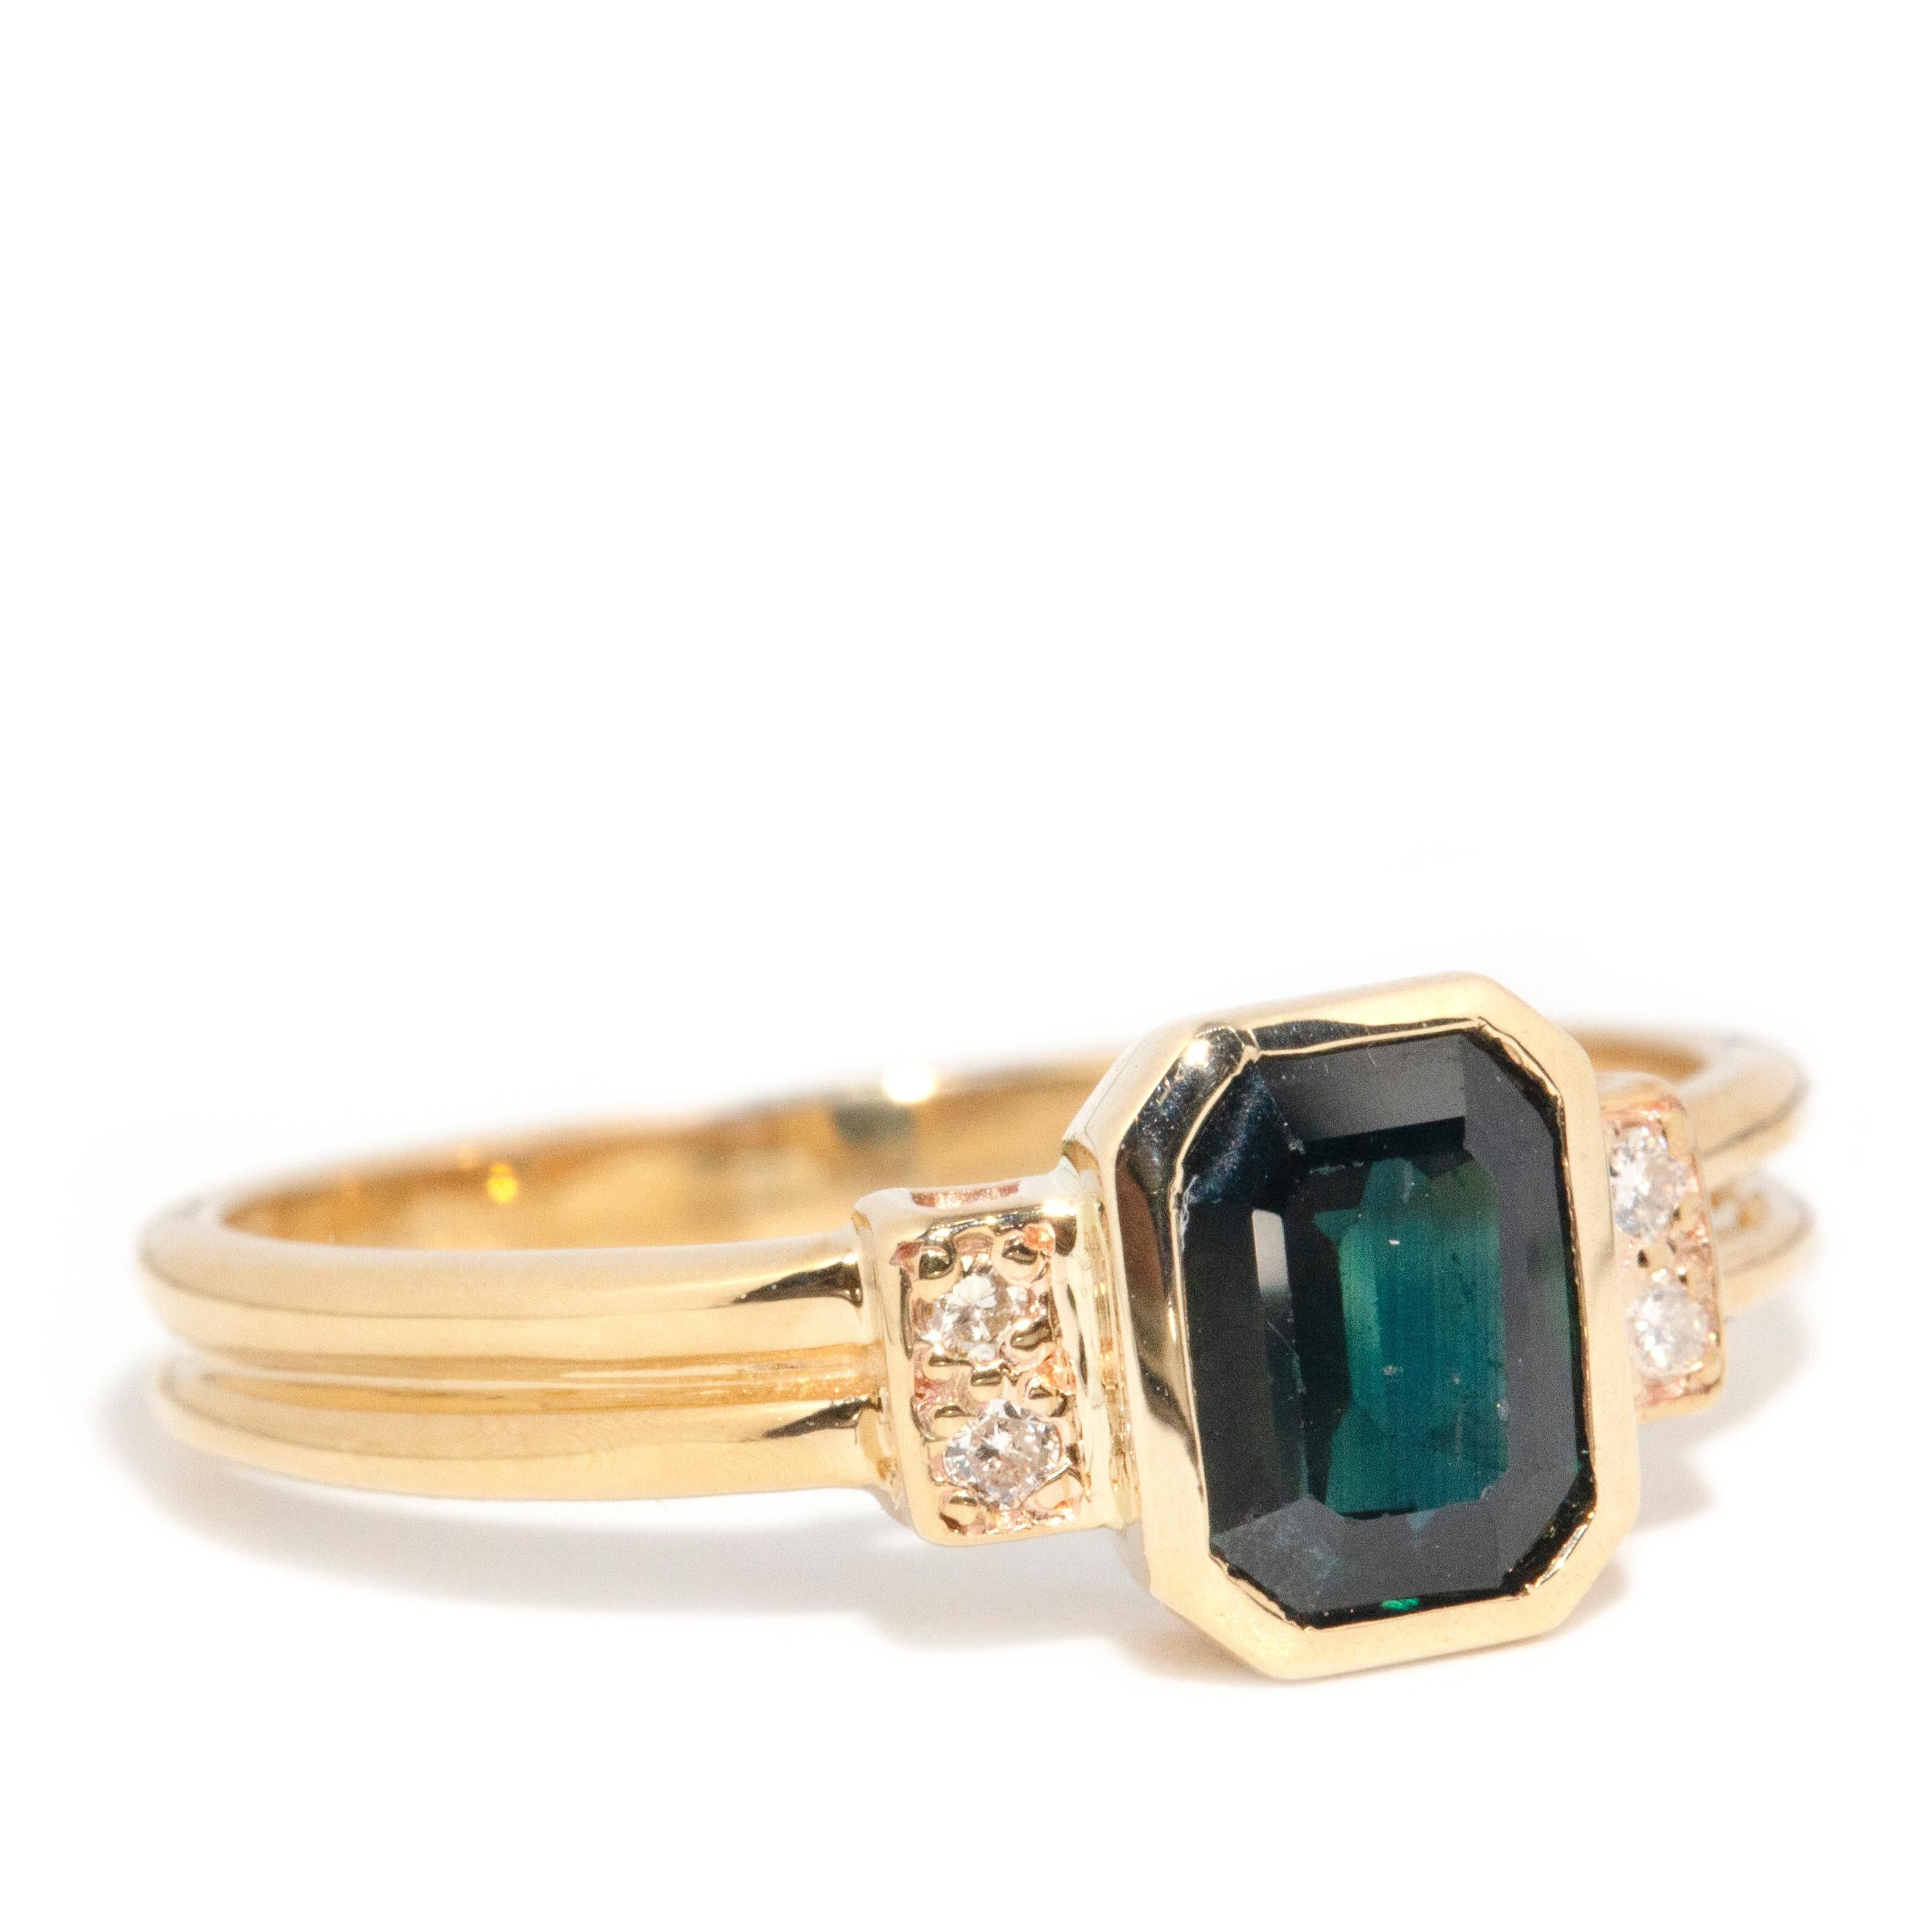 Modern Vintage 1990s 9 Carat Yellow Gold Emerald Cut Teal Sapphire and Diamond Ring